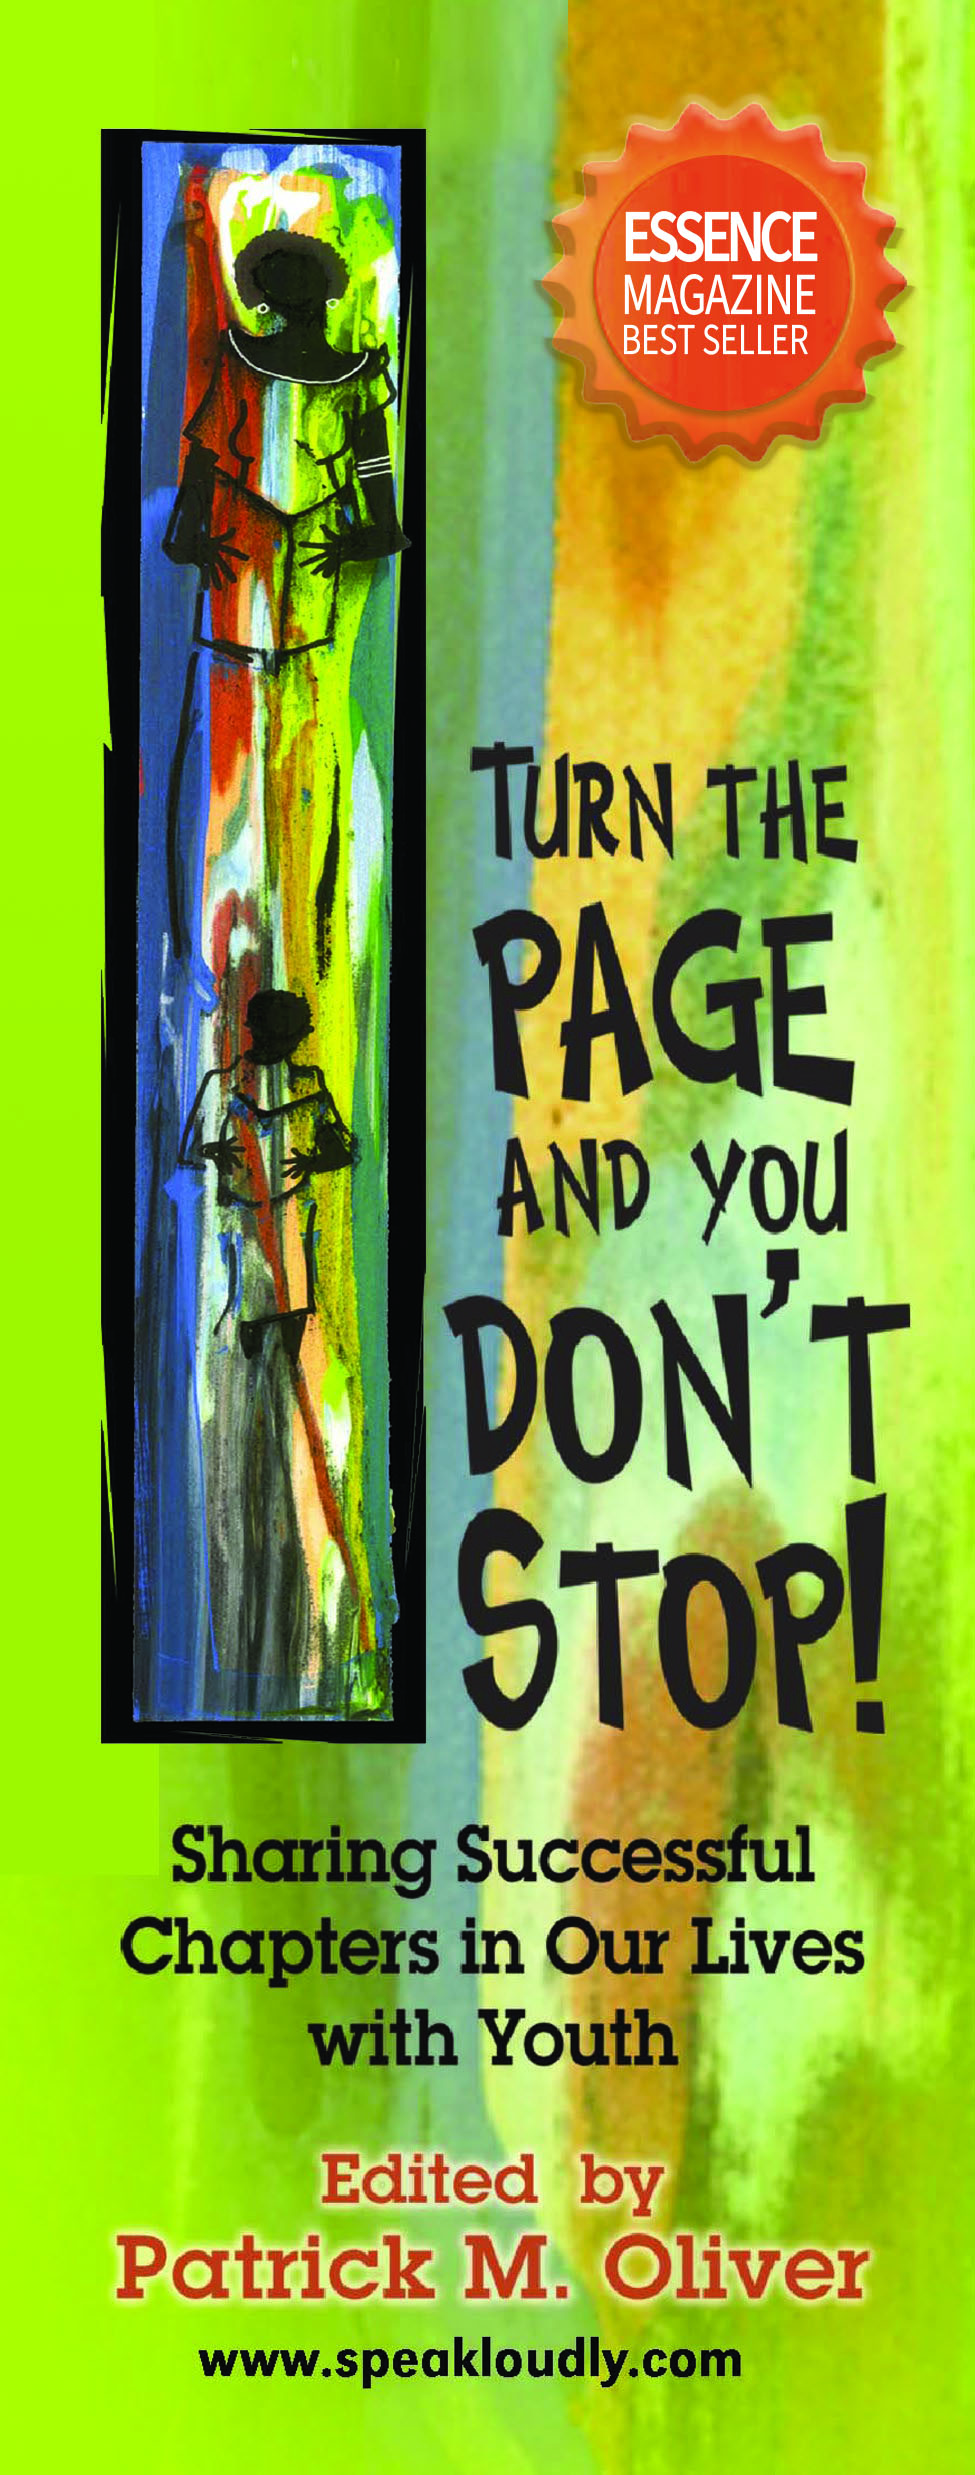 Youth　–　Don't　Page　Say　Readers　Writers　Turn　Lives　You　Loud!　Successful　Stop:　with　the　Chapters　It　in　Our　and　Sharing